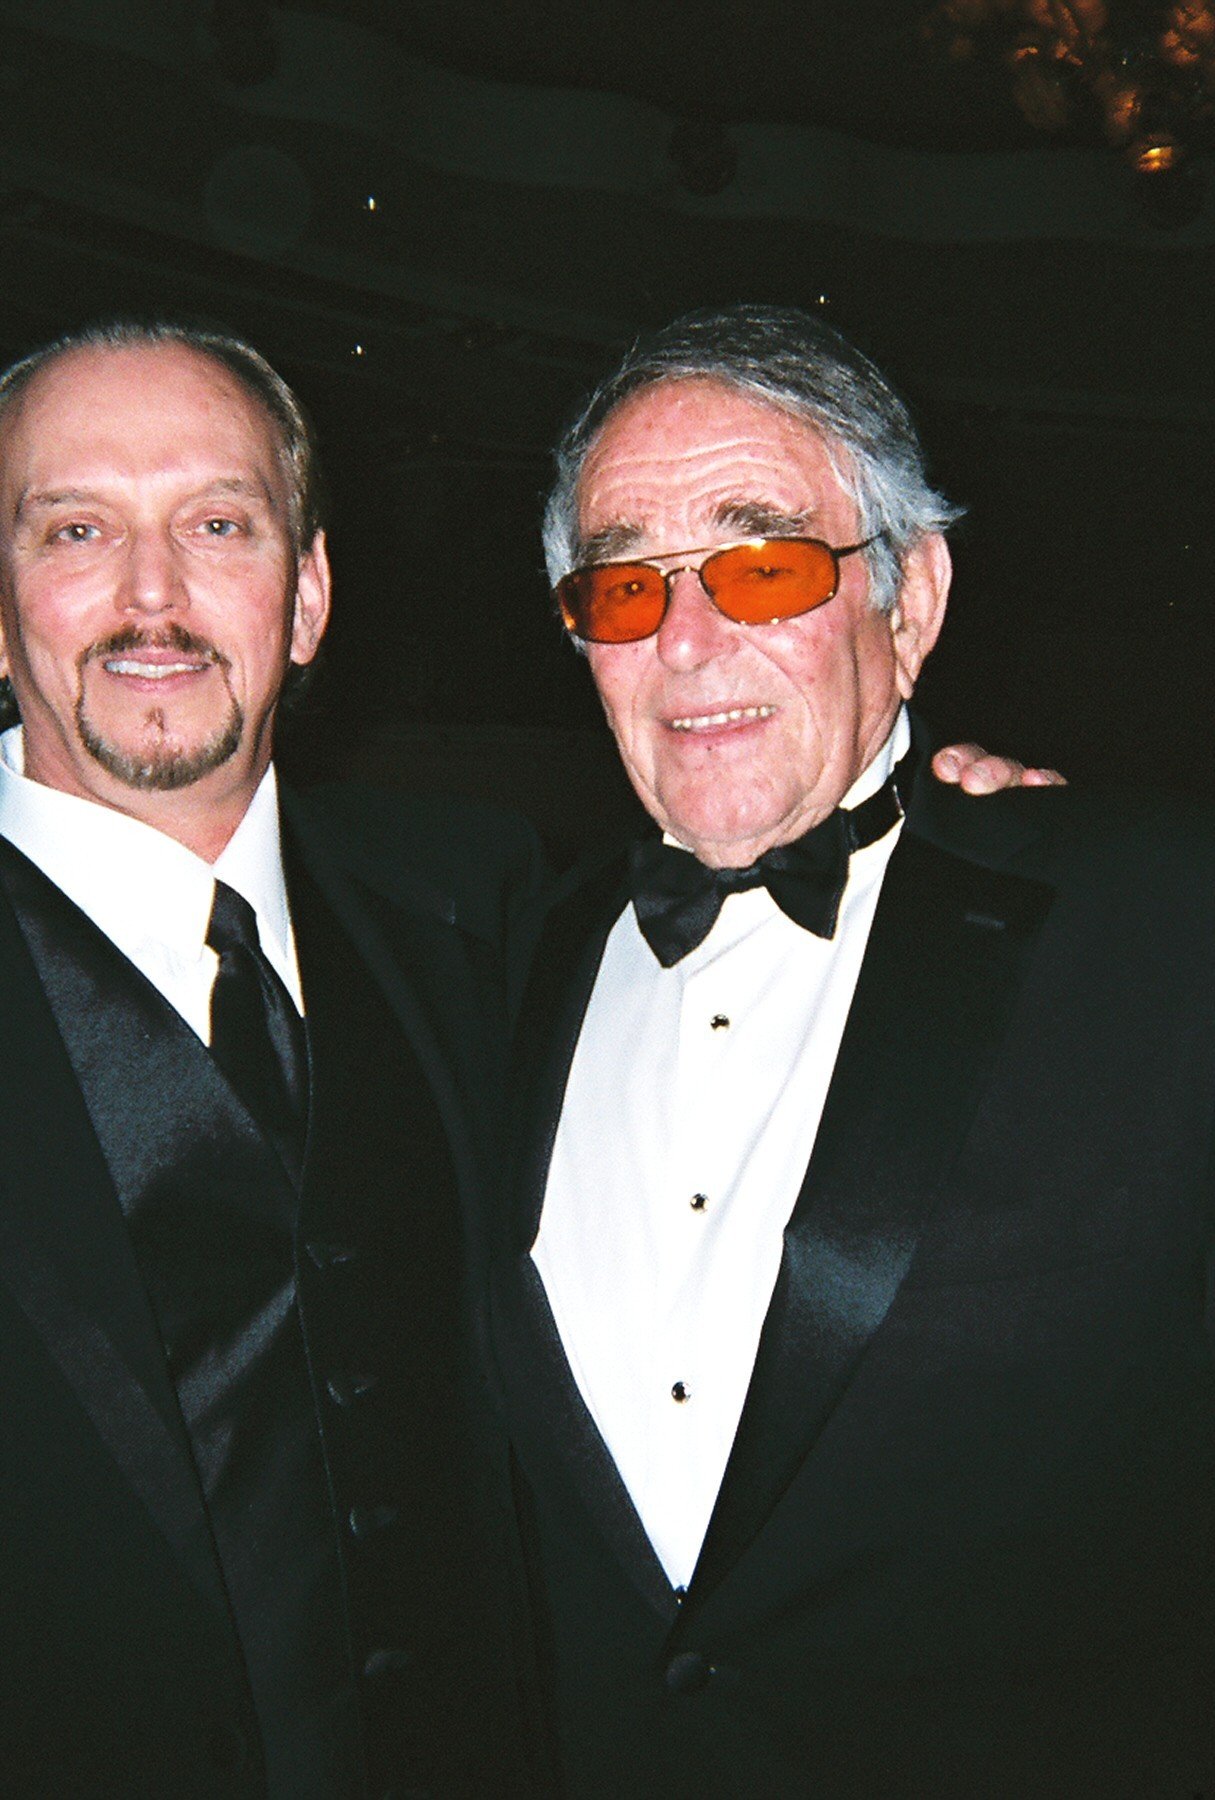 Actor-Director Anthony Hornus (Ghost Town, An Ordinary Killer), left, with Hollywood legend Stuart Whitman at the 2007 Oscar event Night of 100 Stars at the Beverly Hills Hotel.